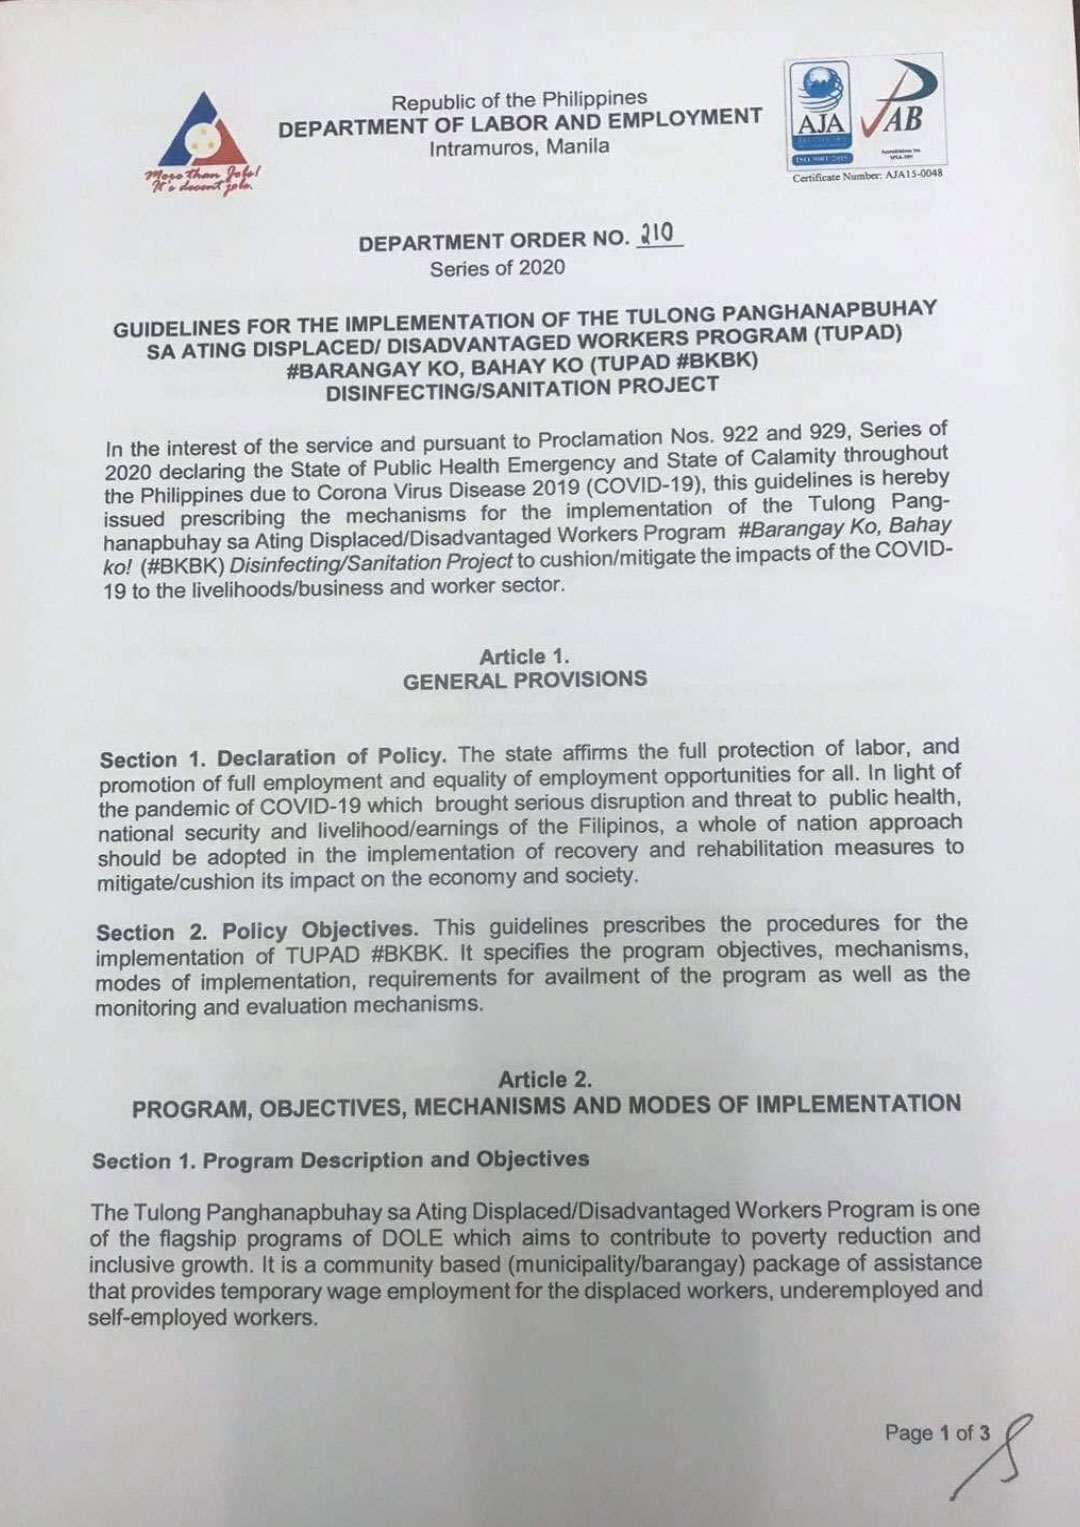 dole-department-order-210-page-01.jpg